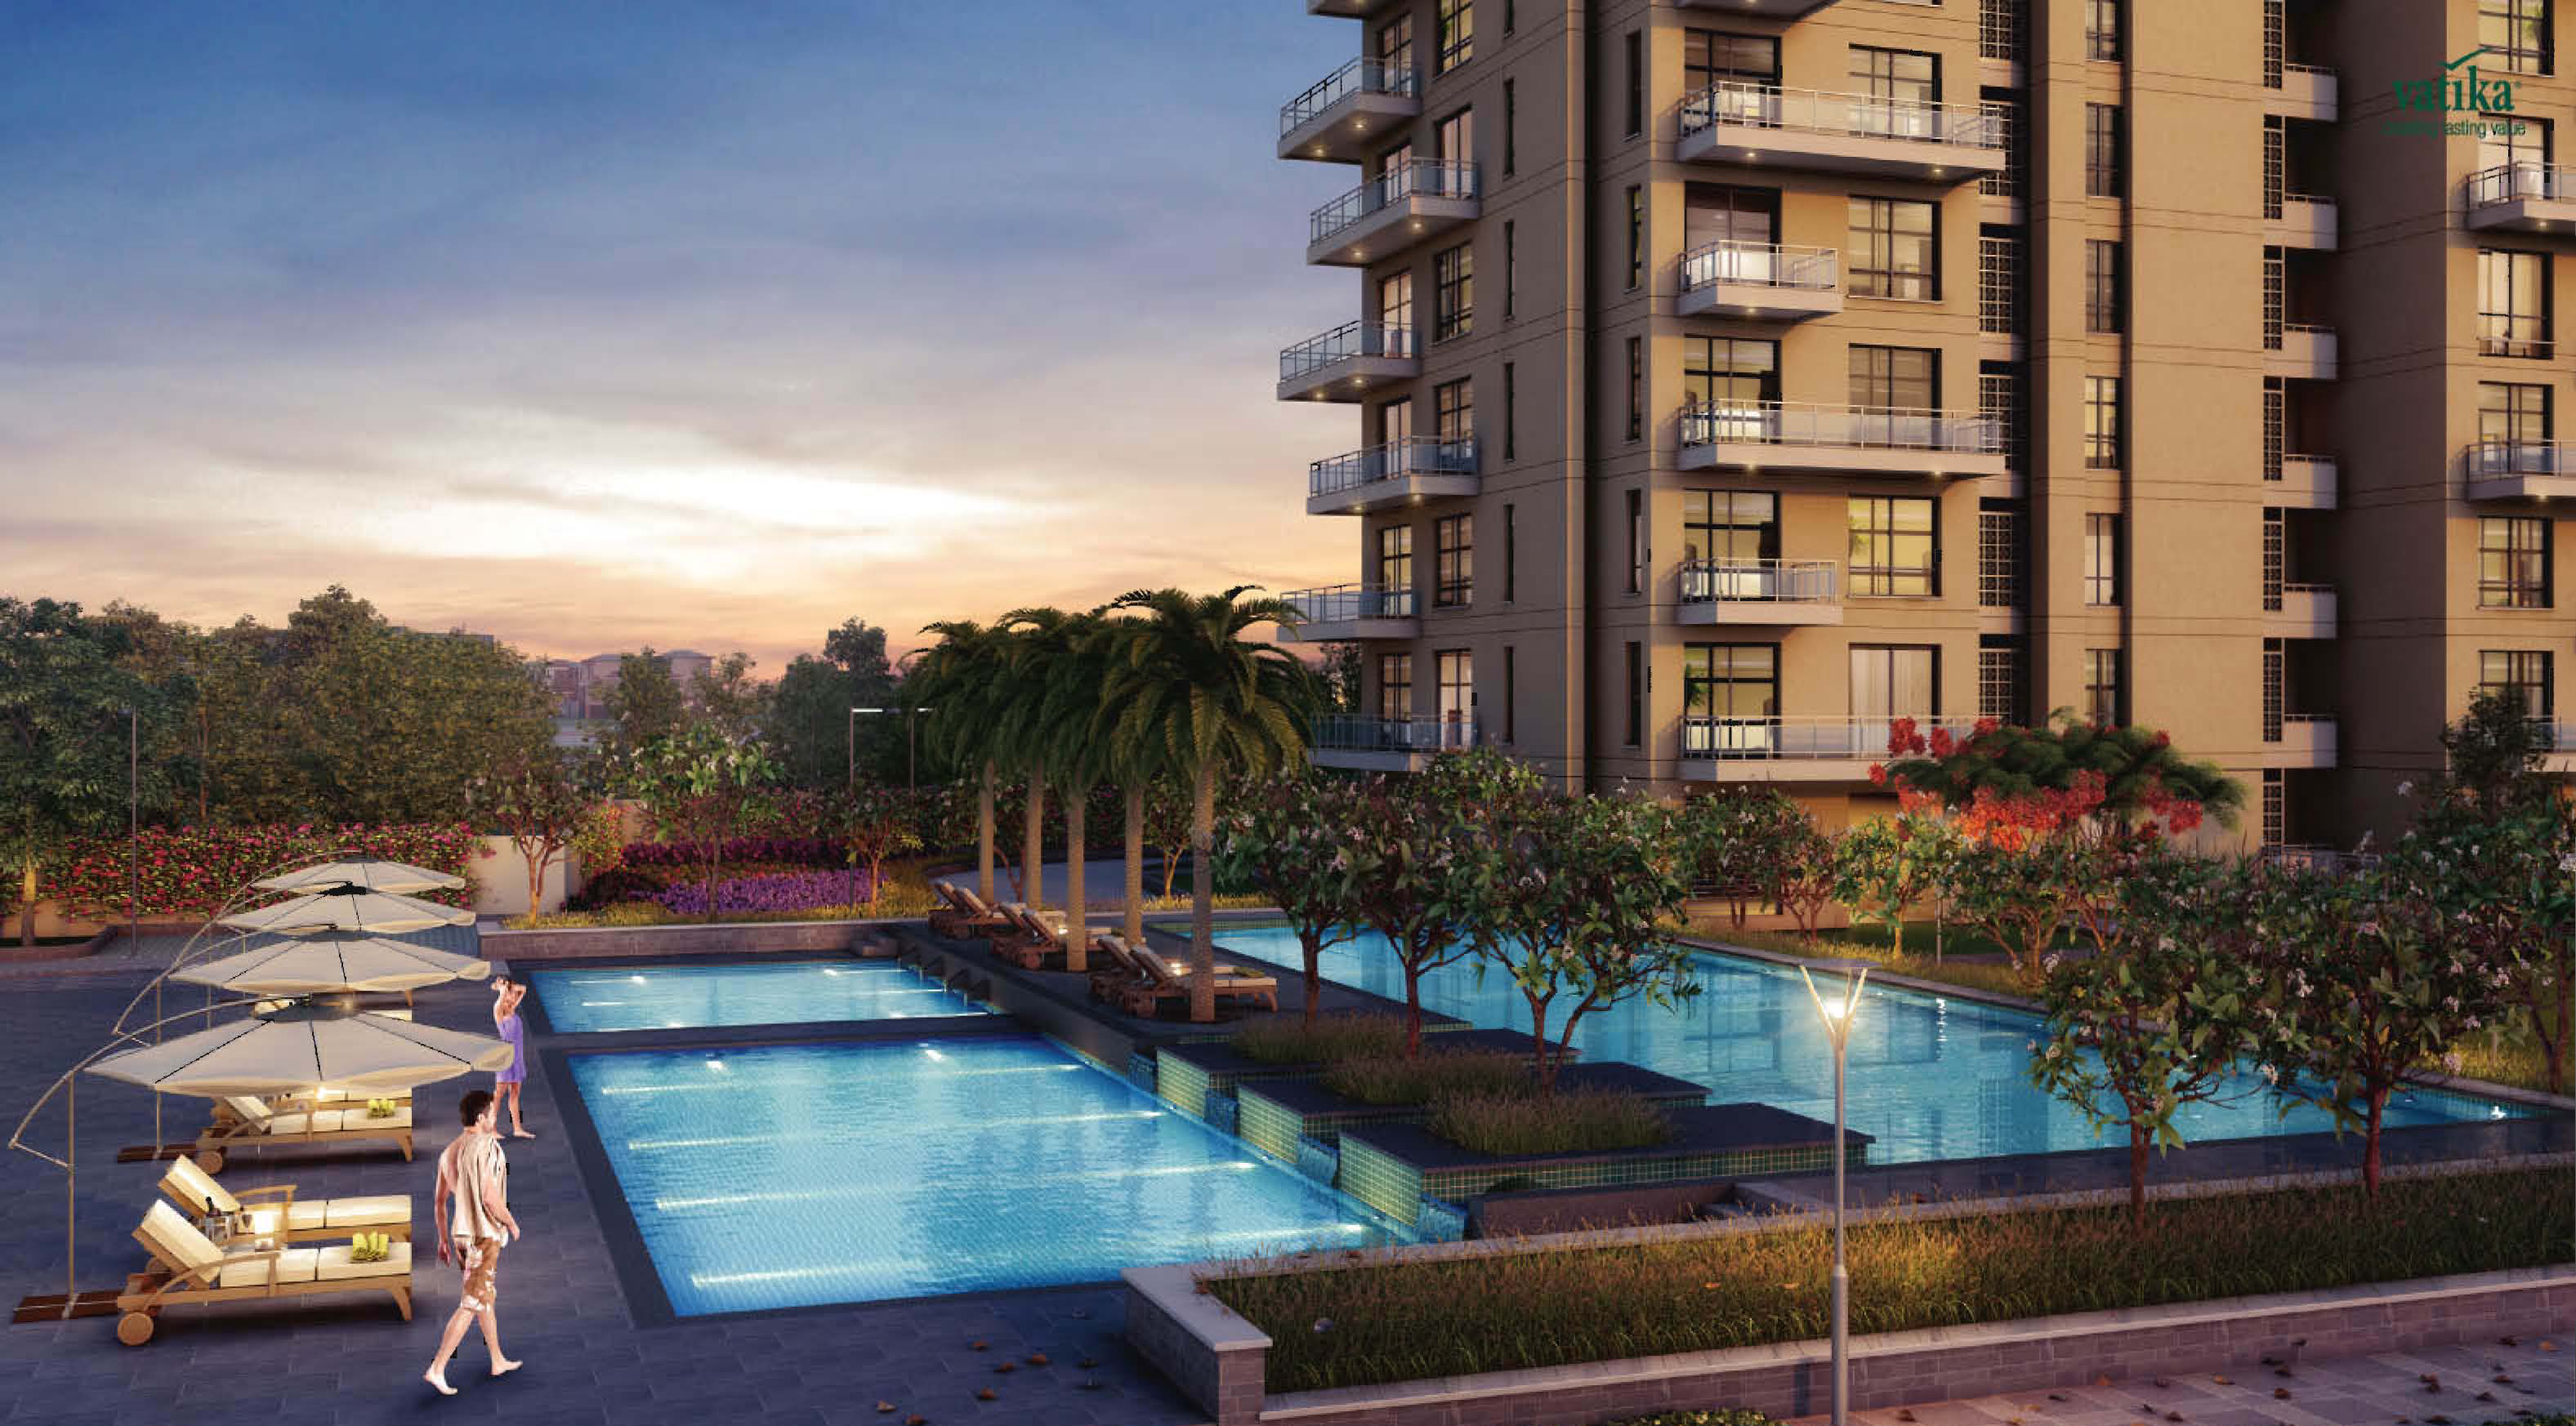 Vatika Sovereign Park is a Near Possession project in Gurgaon